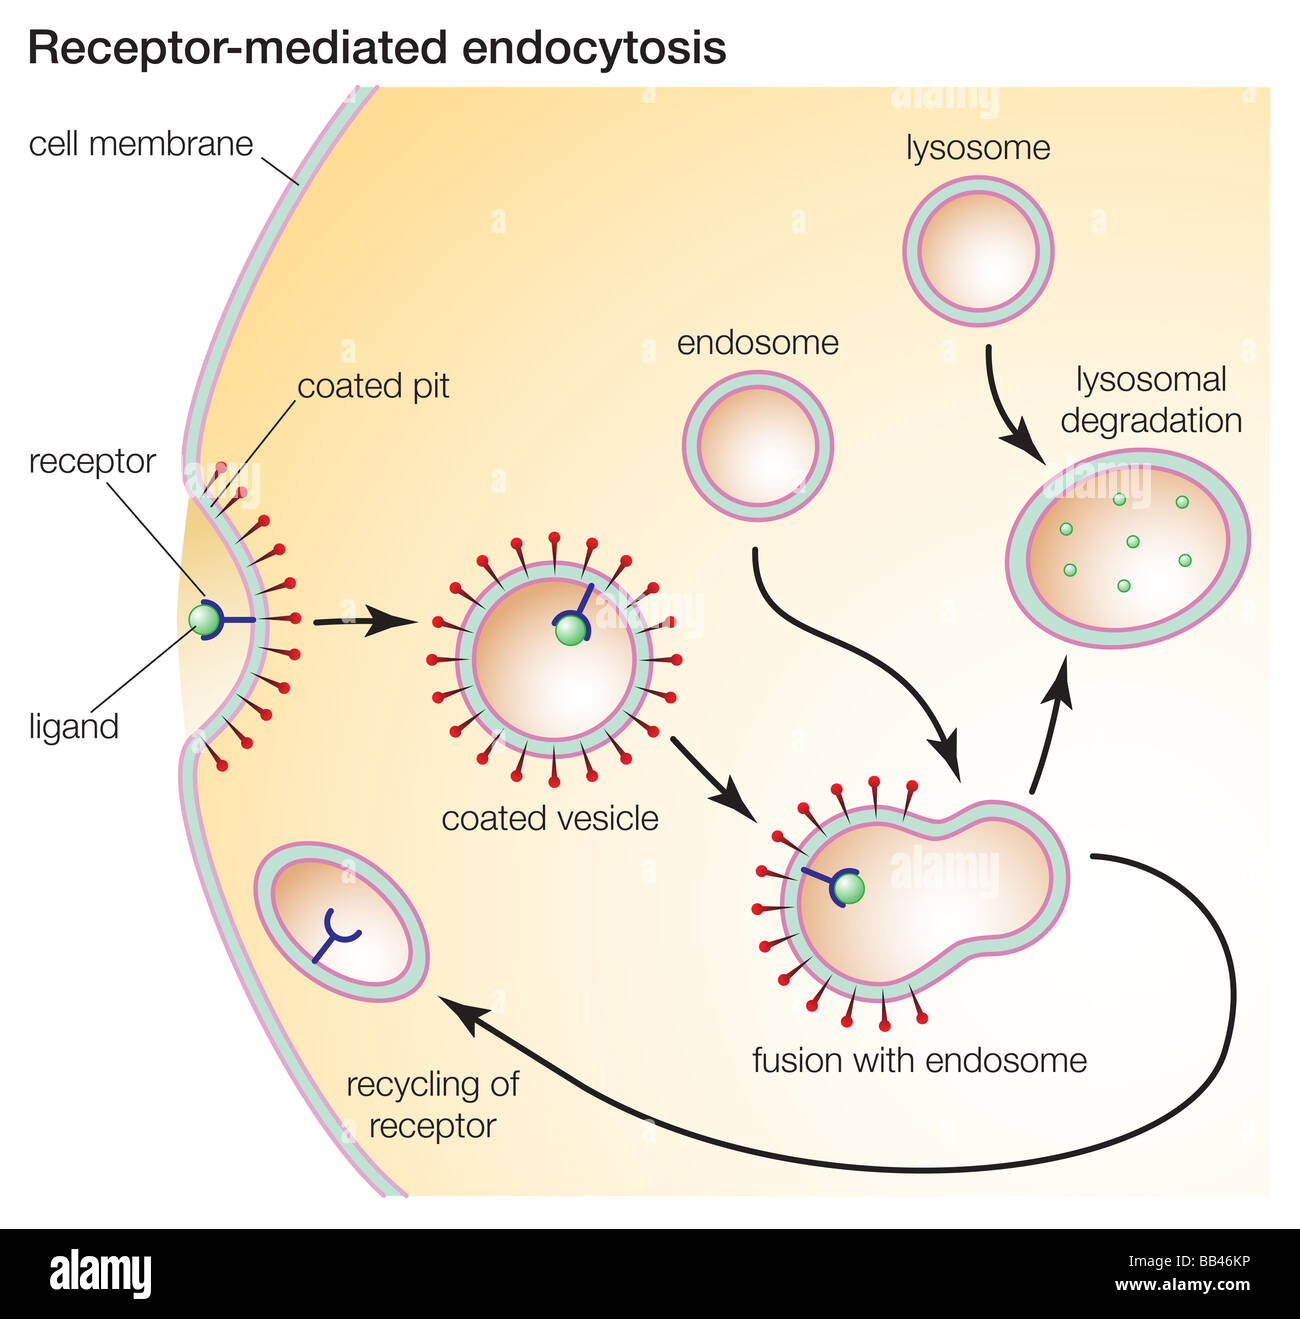 Receptor-mediated endocytosis enables cells to ingest molecules such as protein that are necessary for normal cell functioning. Stock Photo